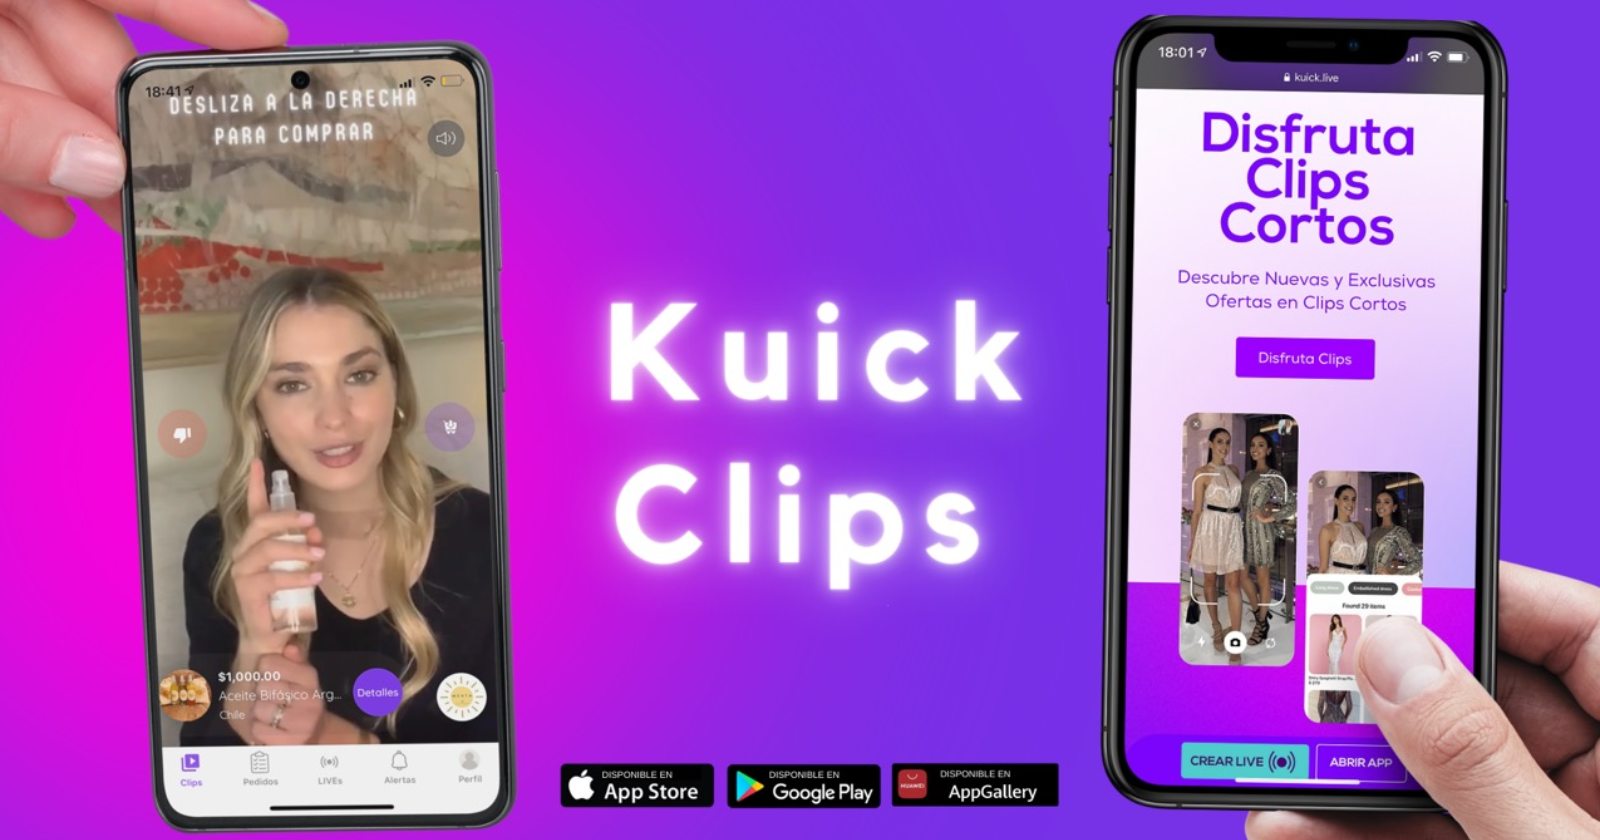 Kuick Clips